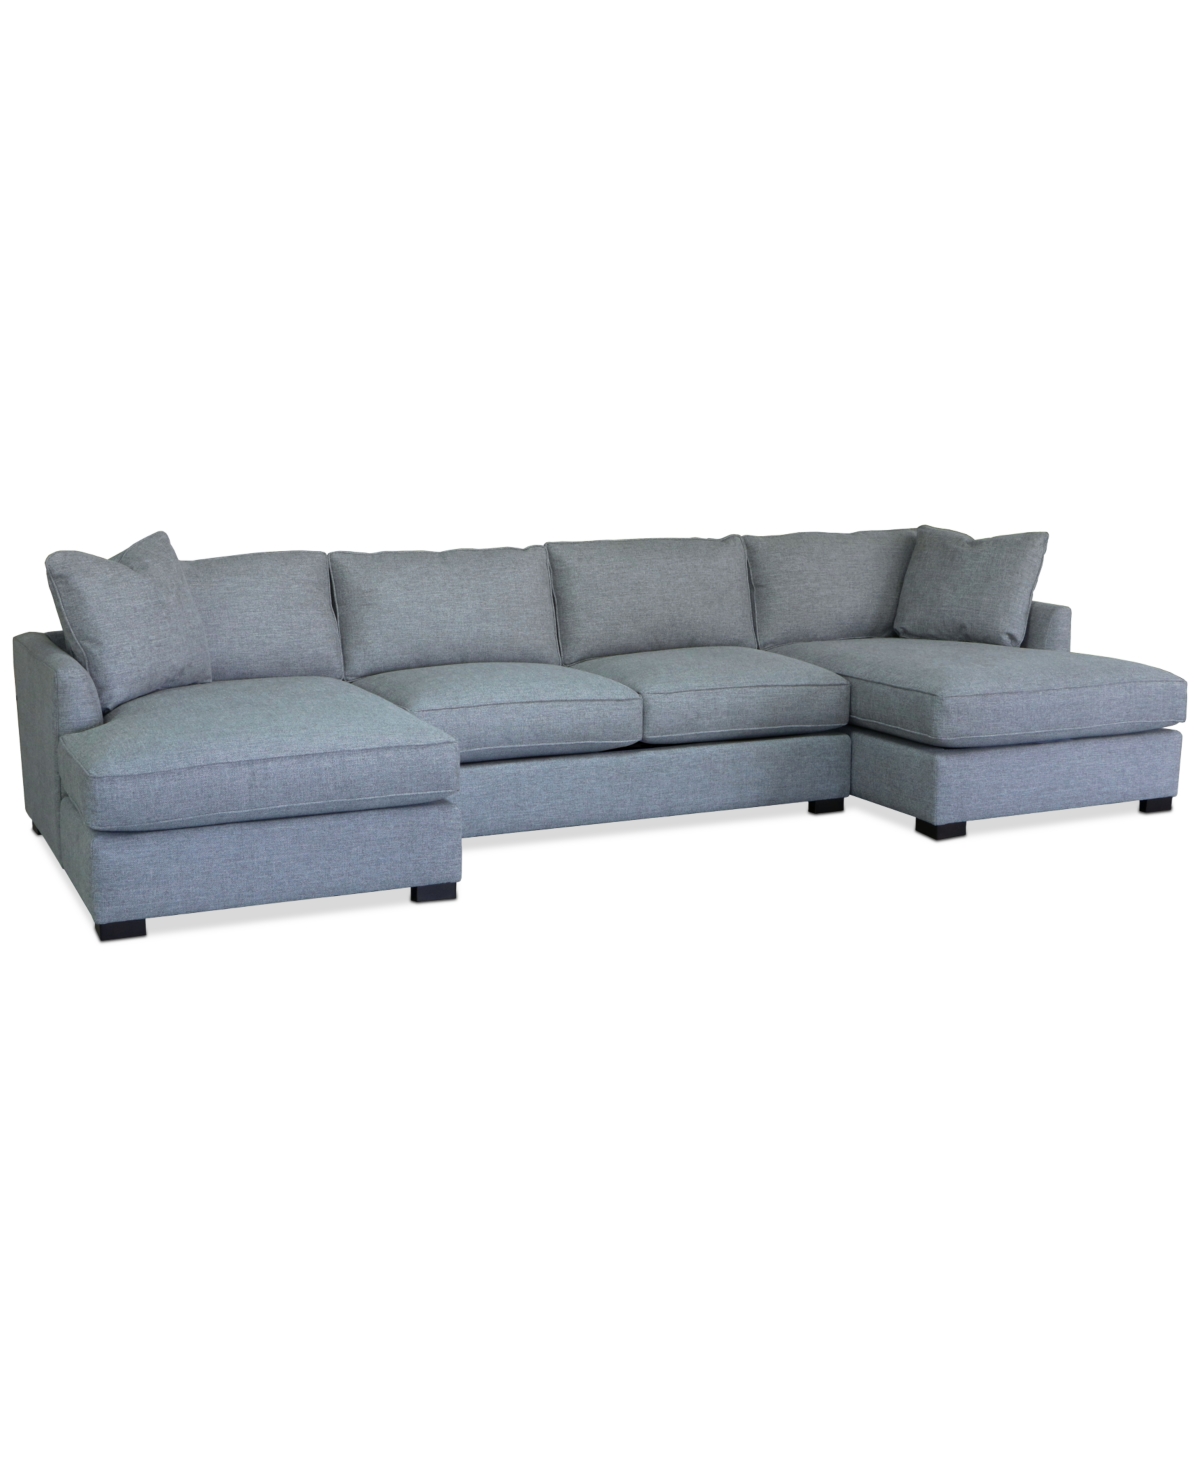 Furniture Nightford 146" 3-pc. Fabric Double Chaise Sectional, Created For Macy's In Granite